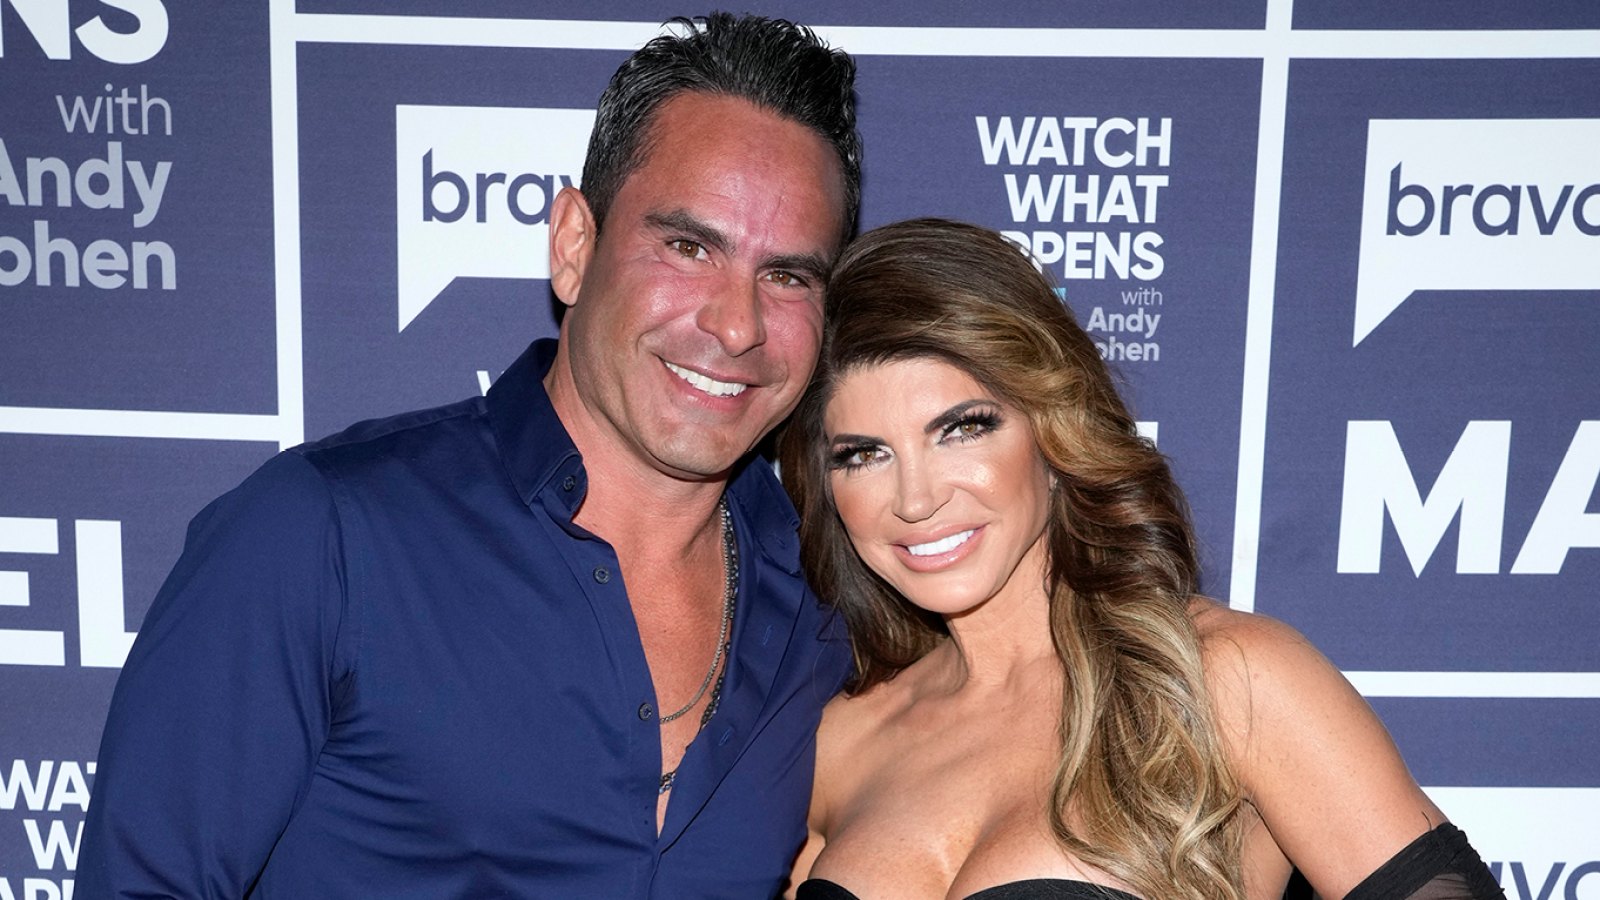 Teresa Giudice’s Wedding to Luis Ruelas Will Be Filmed for Her ‘Real Housewives of New Jersey’ Spinoff Special